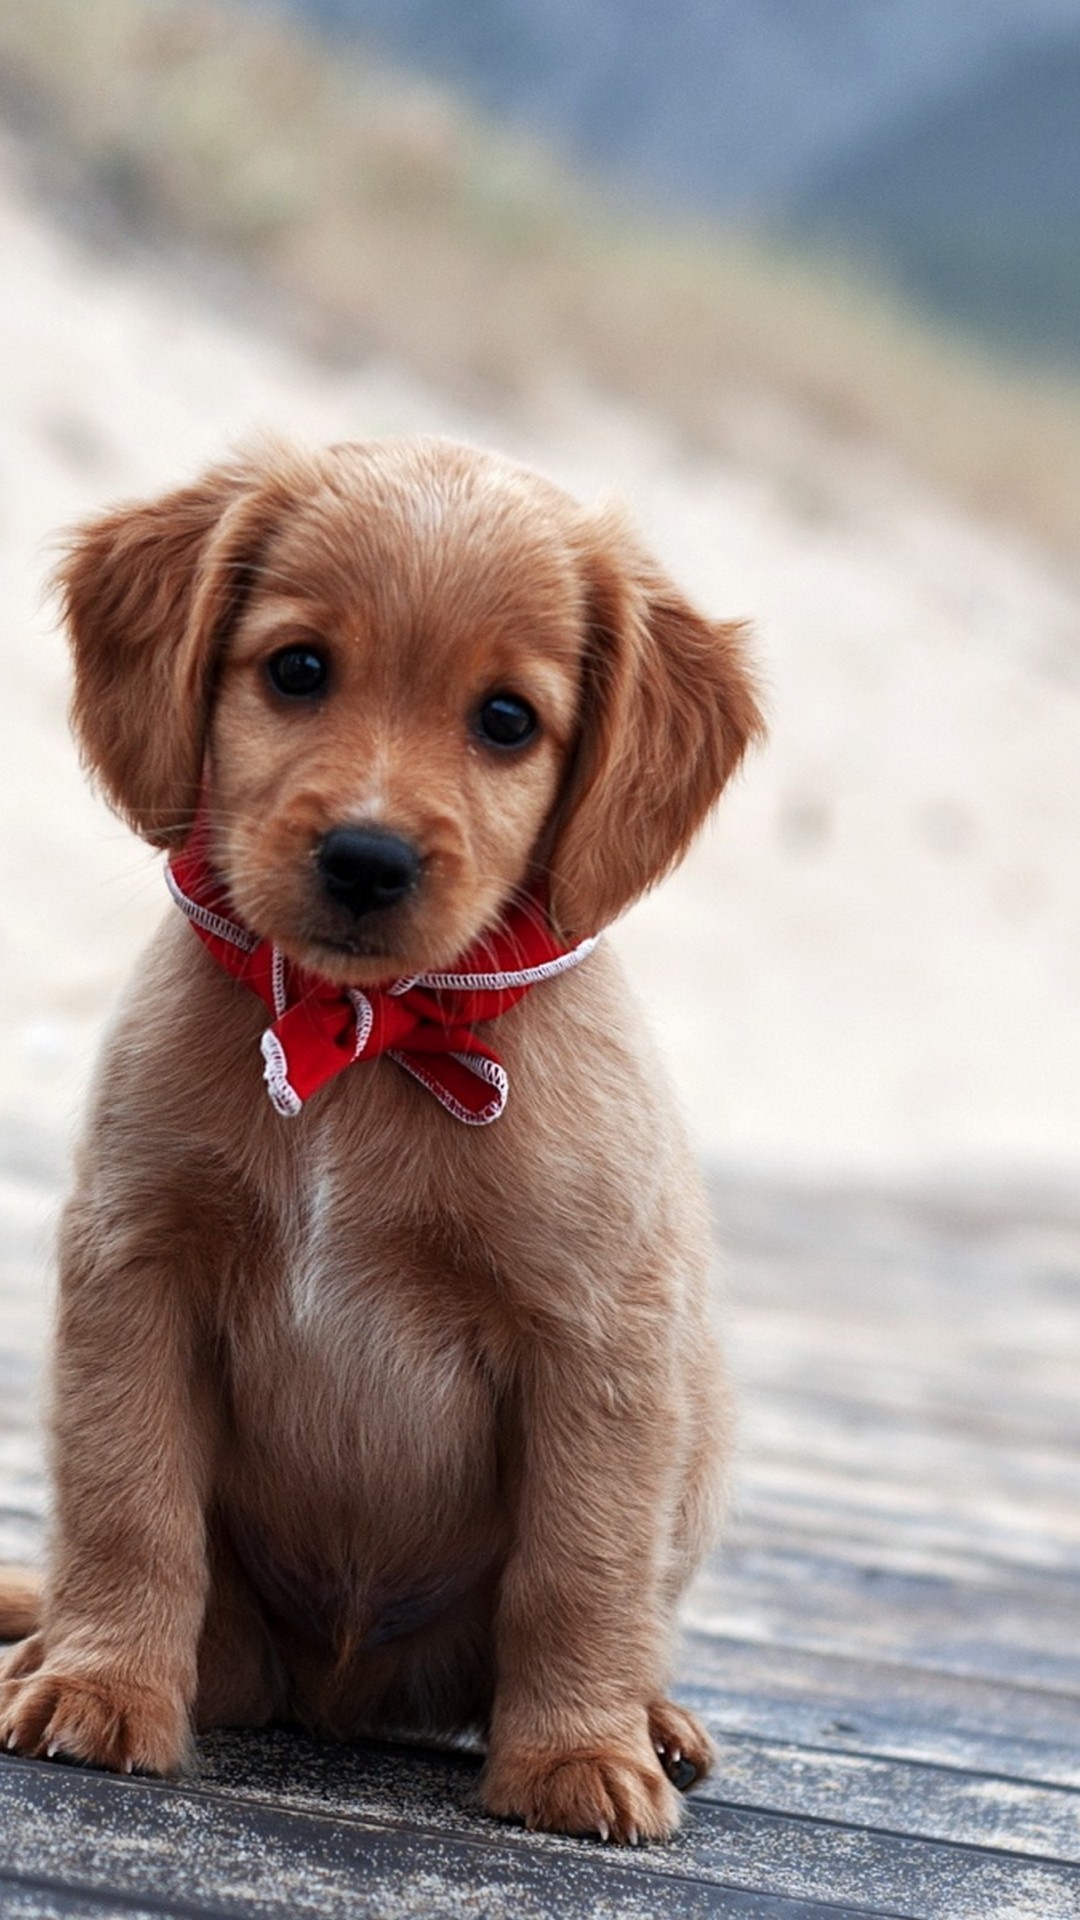 Pics Of Puppies Wallpaper Android